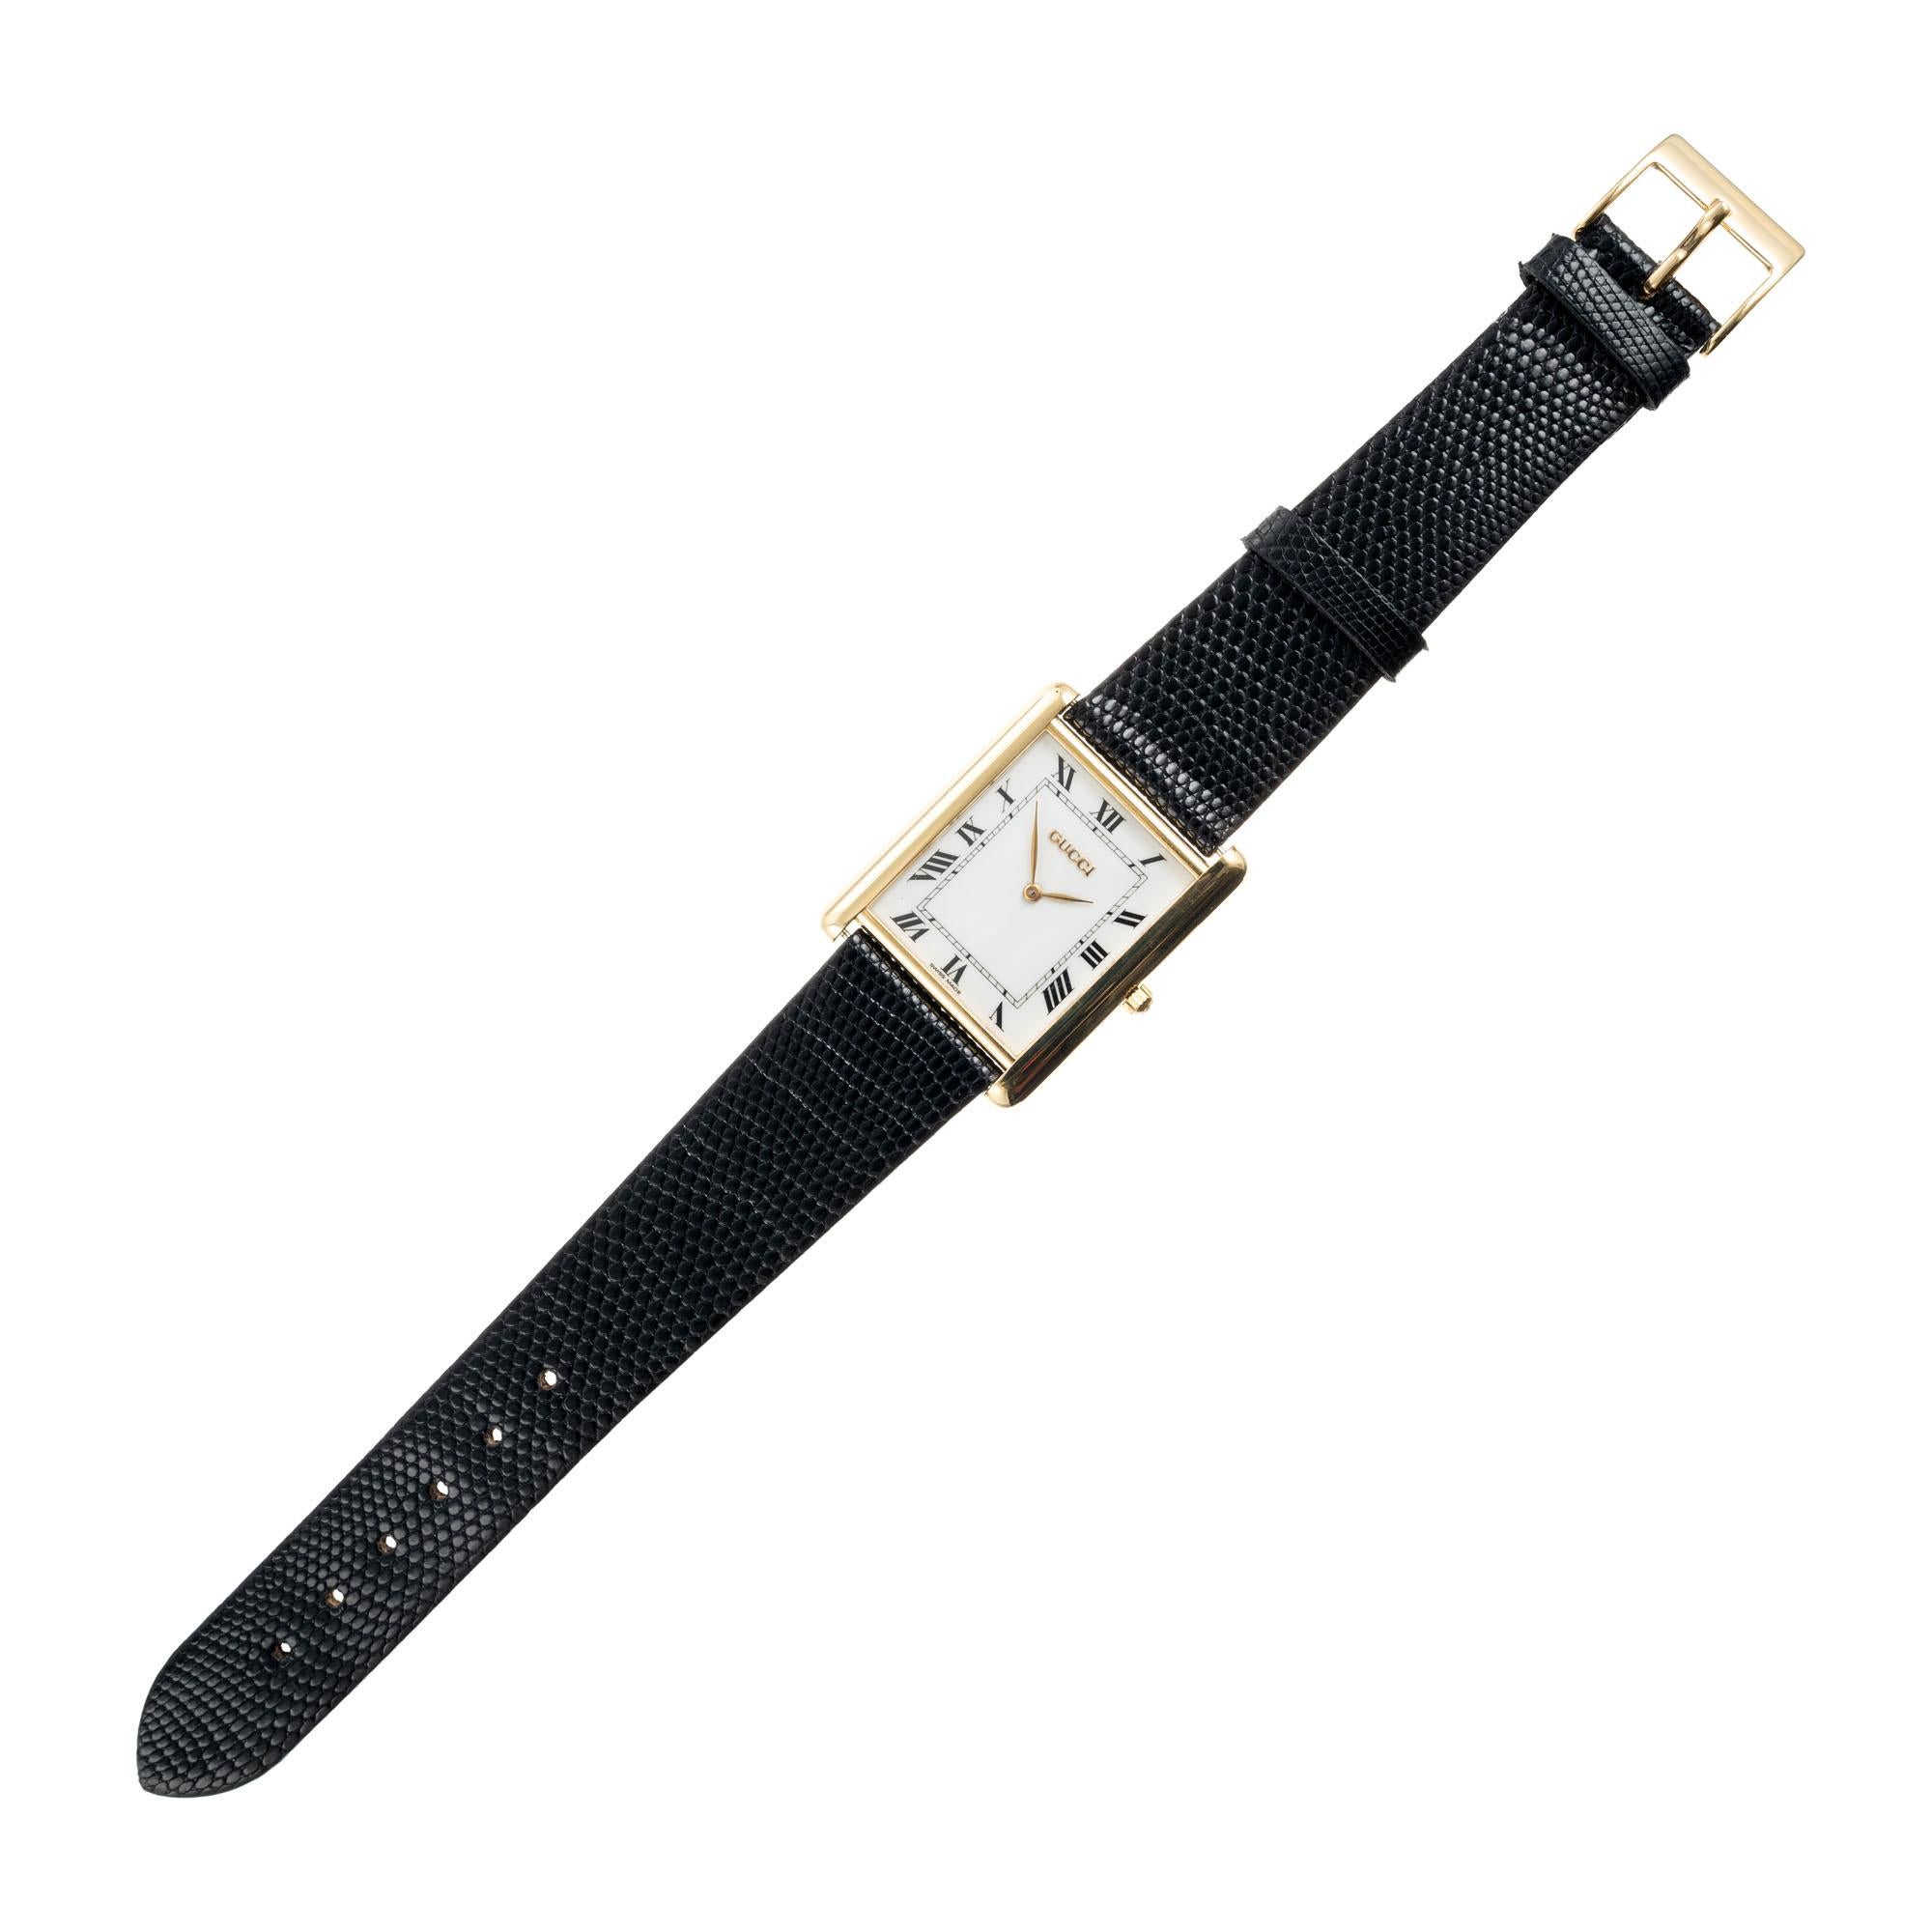 Mens tank style 18k yellow gold wristwatch. Original Gucci quartz watch with white dial and Roman numerals. 

Length: 35.17mm
Width: 28mm
Band width at case: 20mm
Case thickness: 5.35mm
Band: Black genuine lizard
Crystal: sapphire
Dial: white with